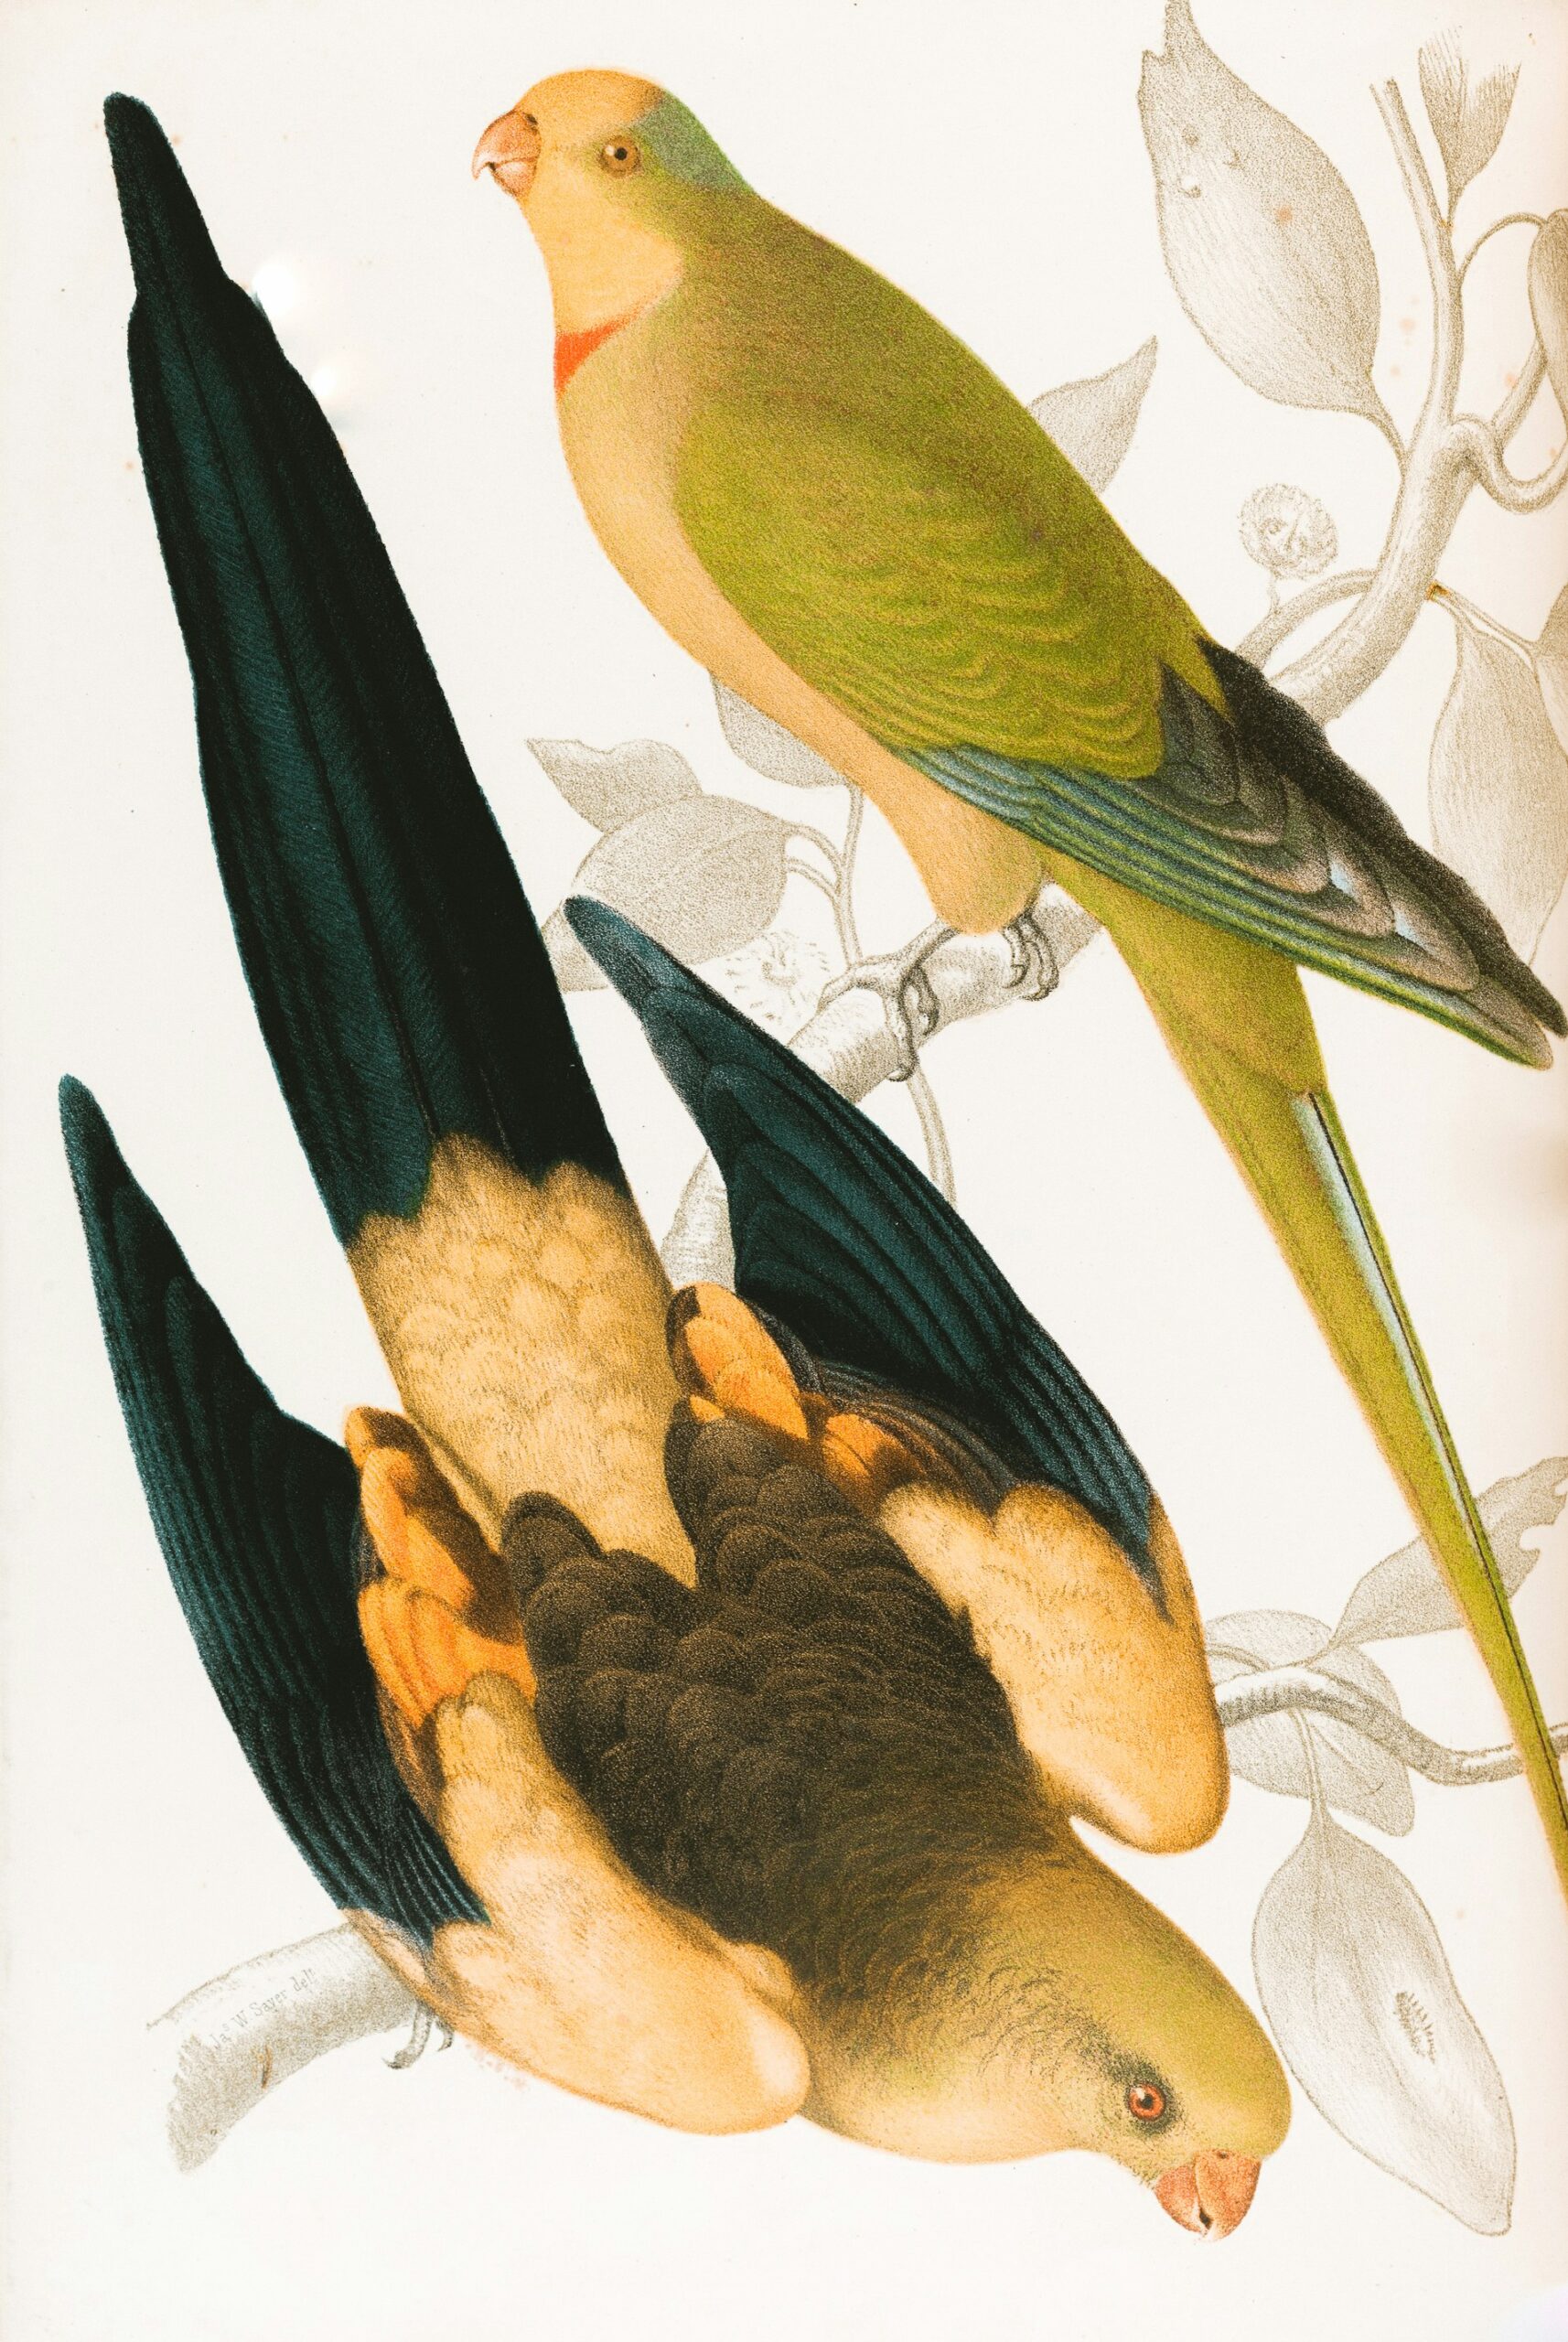 An illustration of two parrots